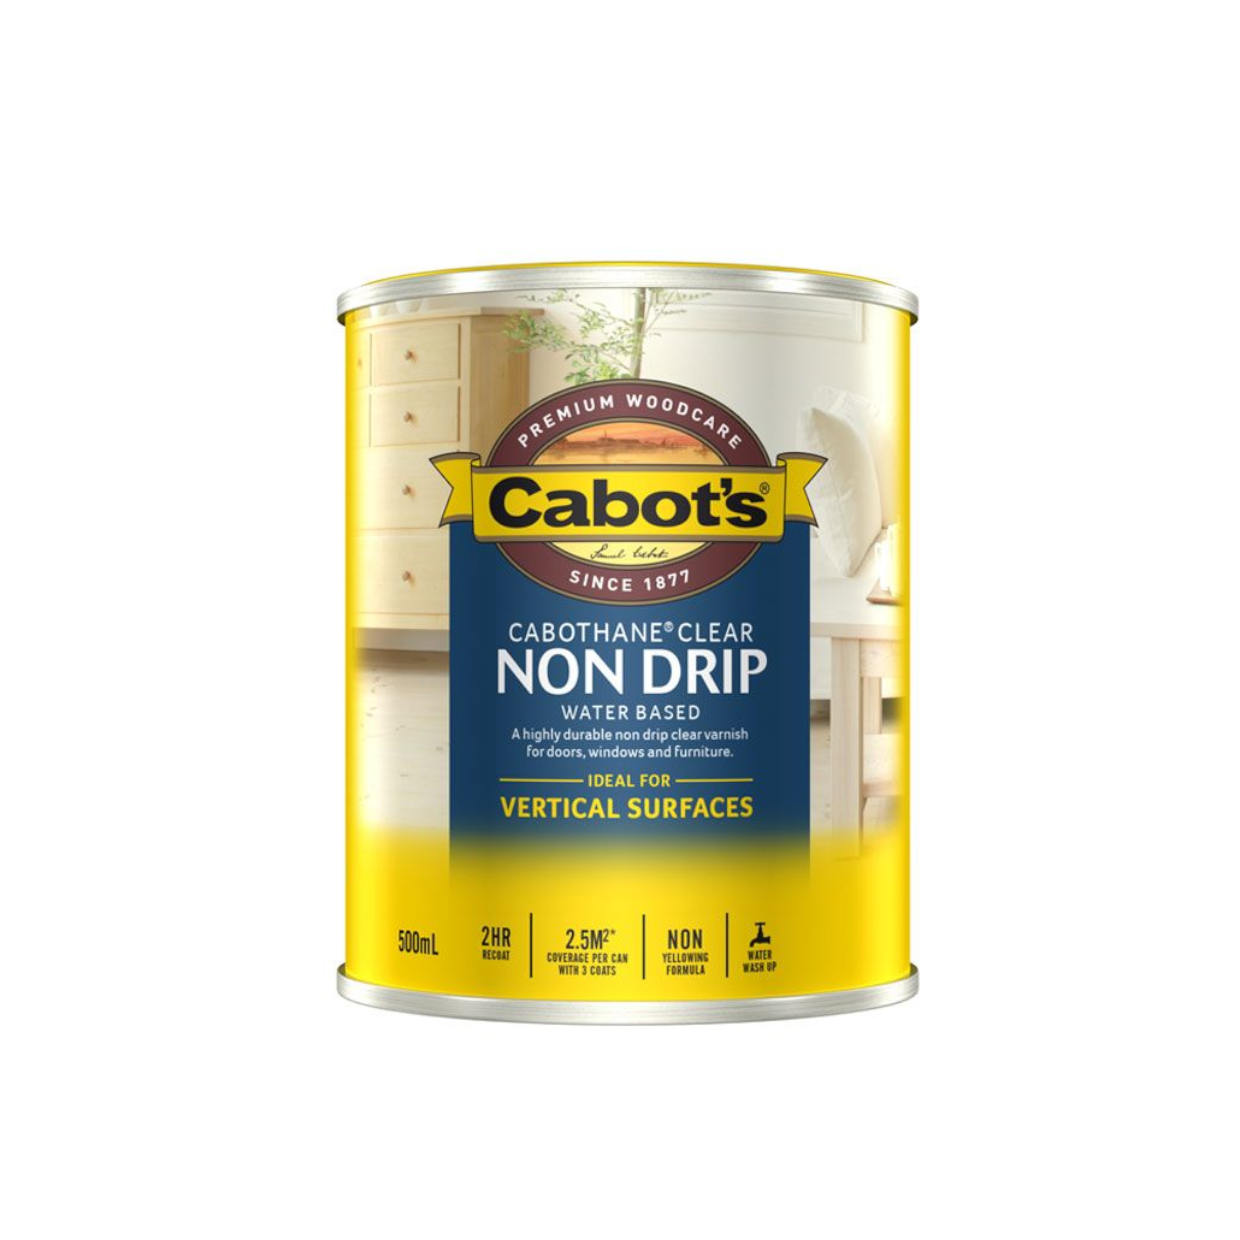 CABOTS_Cabothane_Clear_Non_Drip_Water_Based_500_ml